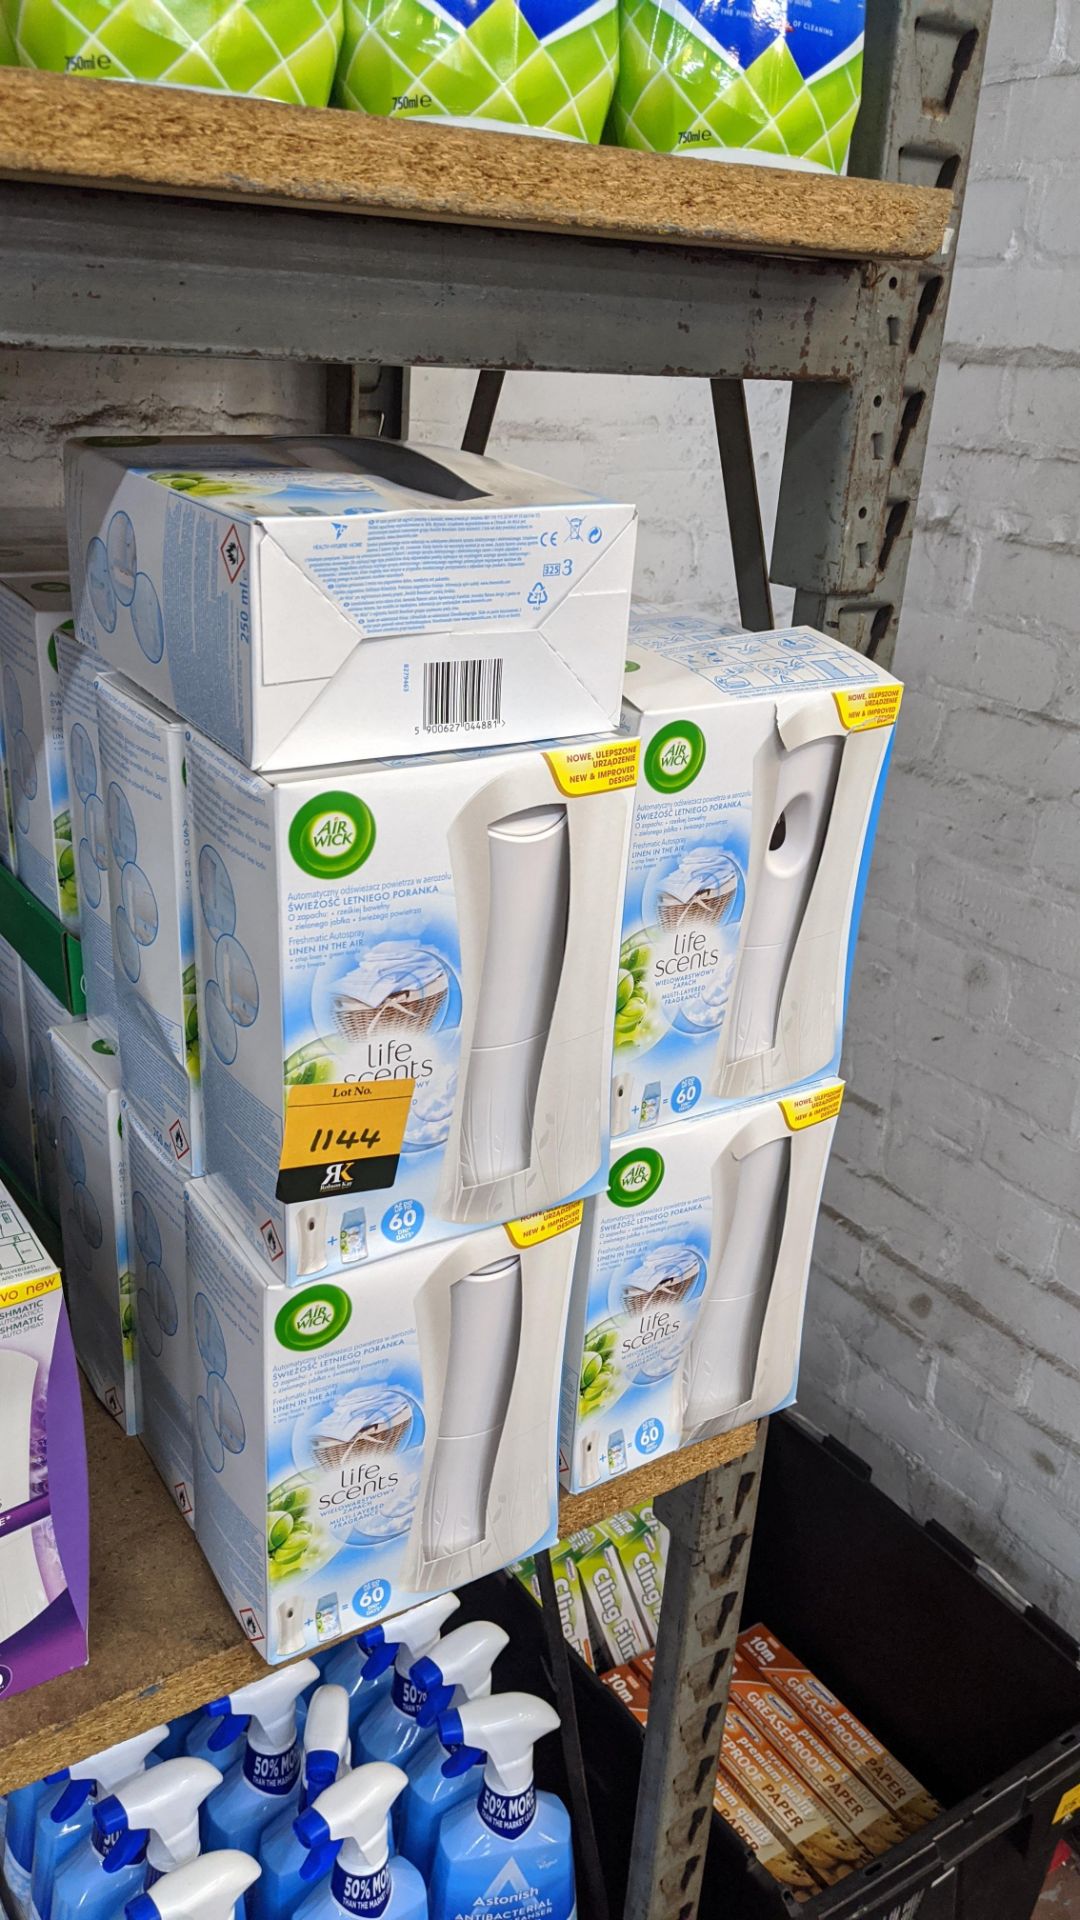 29 off Air Wick automatic air freshening systems, each including refill. IMPORTANT – DO NOT BID